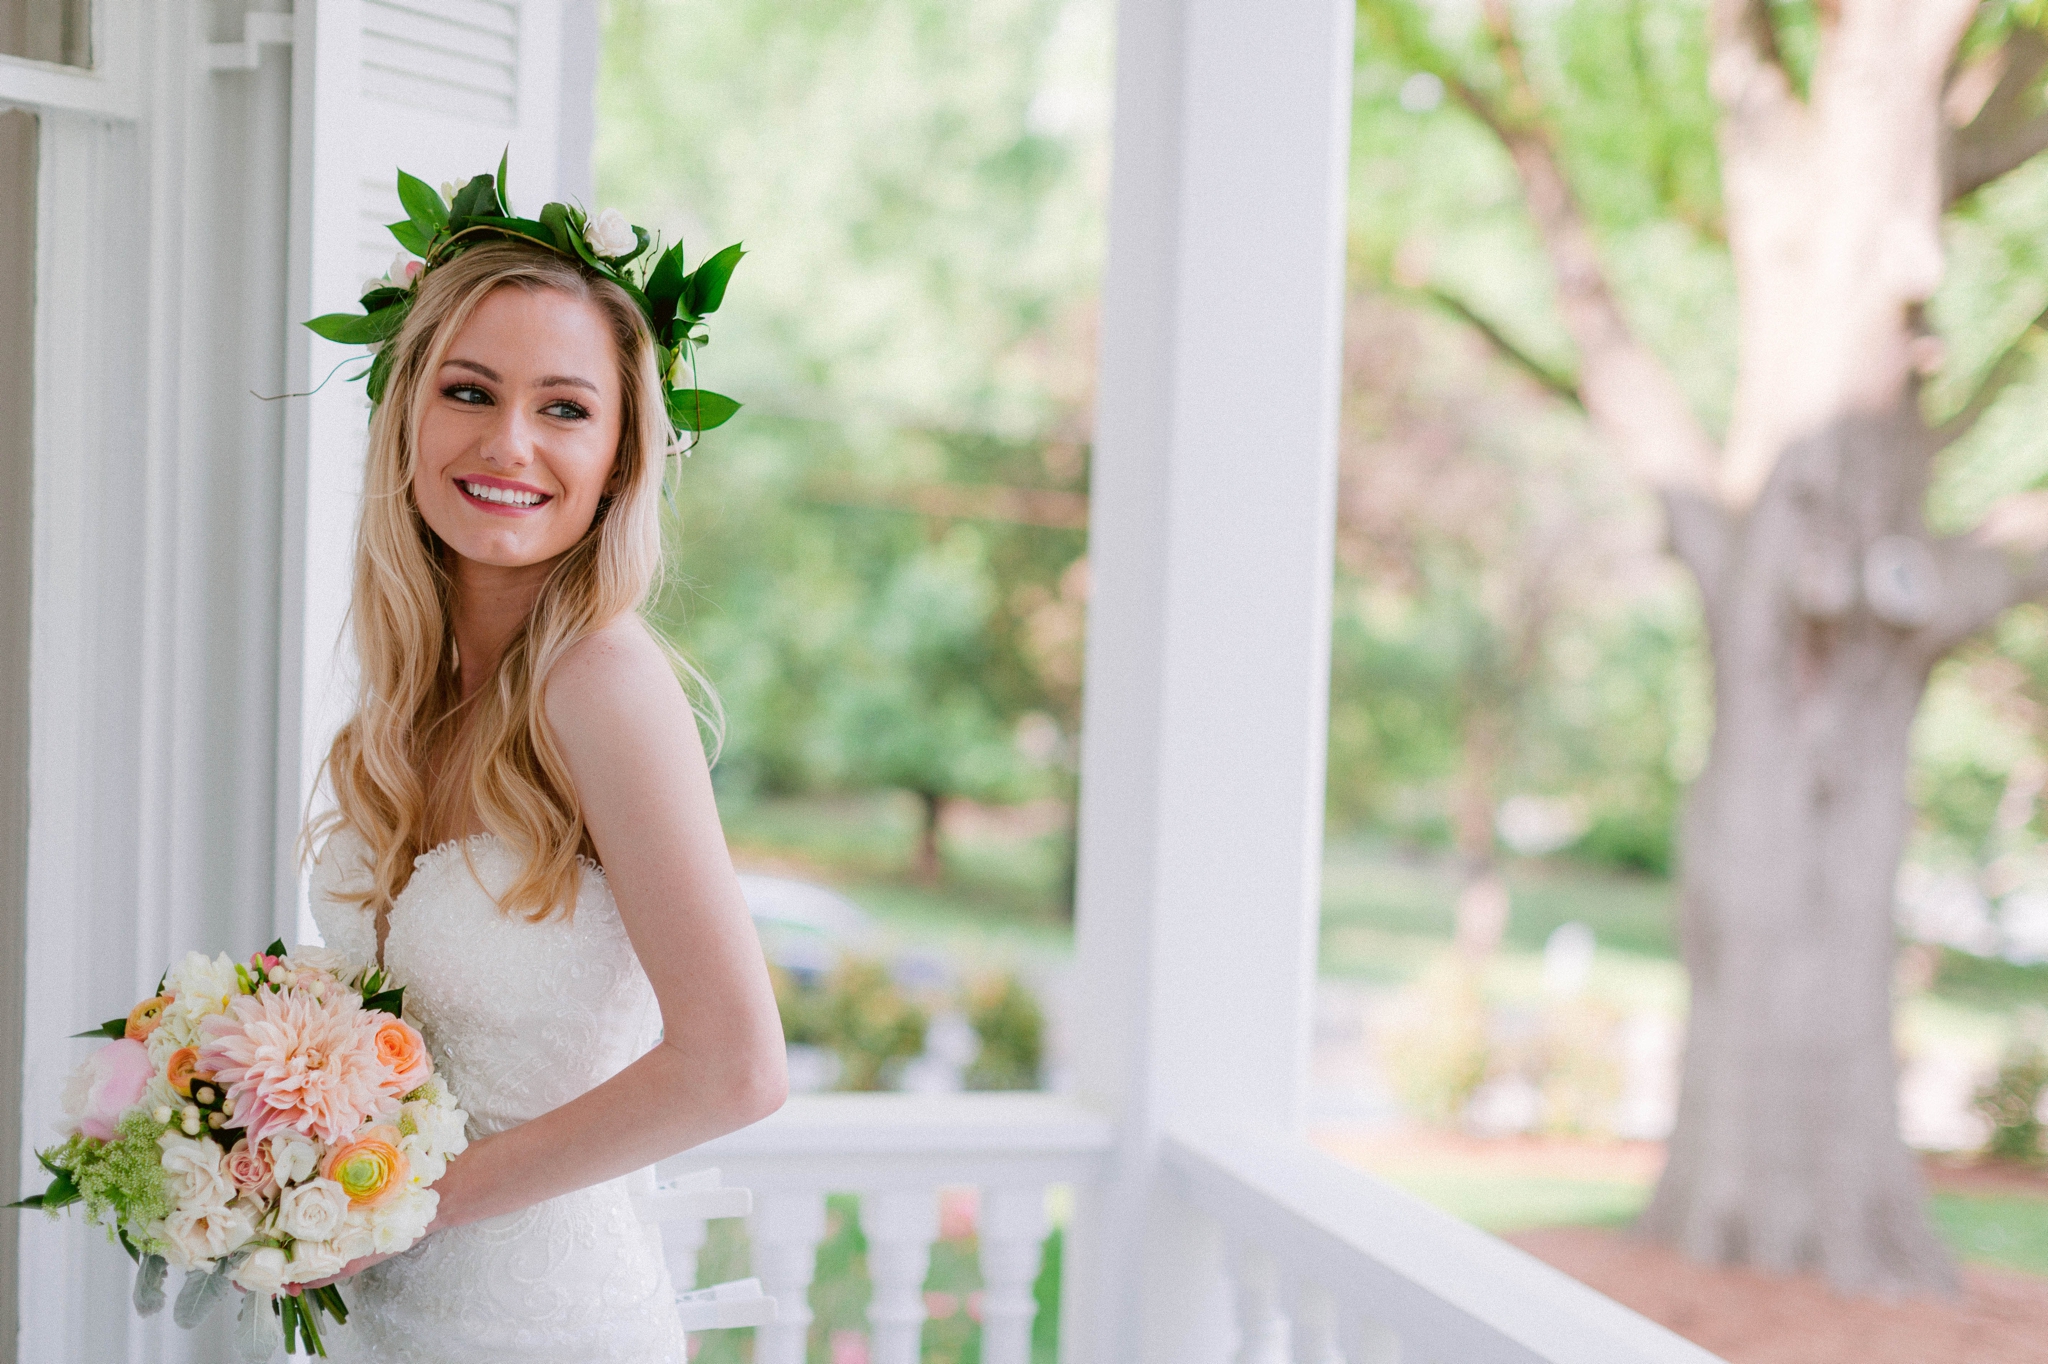  Indoor Bridal Portraits in an all white room at a luxury estate with natural light before the ceremony - Bride is wearing a Hawaiian Flower Crown in a Wedding Gown by Stella York and standing in the doorway with a golden chandelier with vintage furn